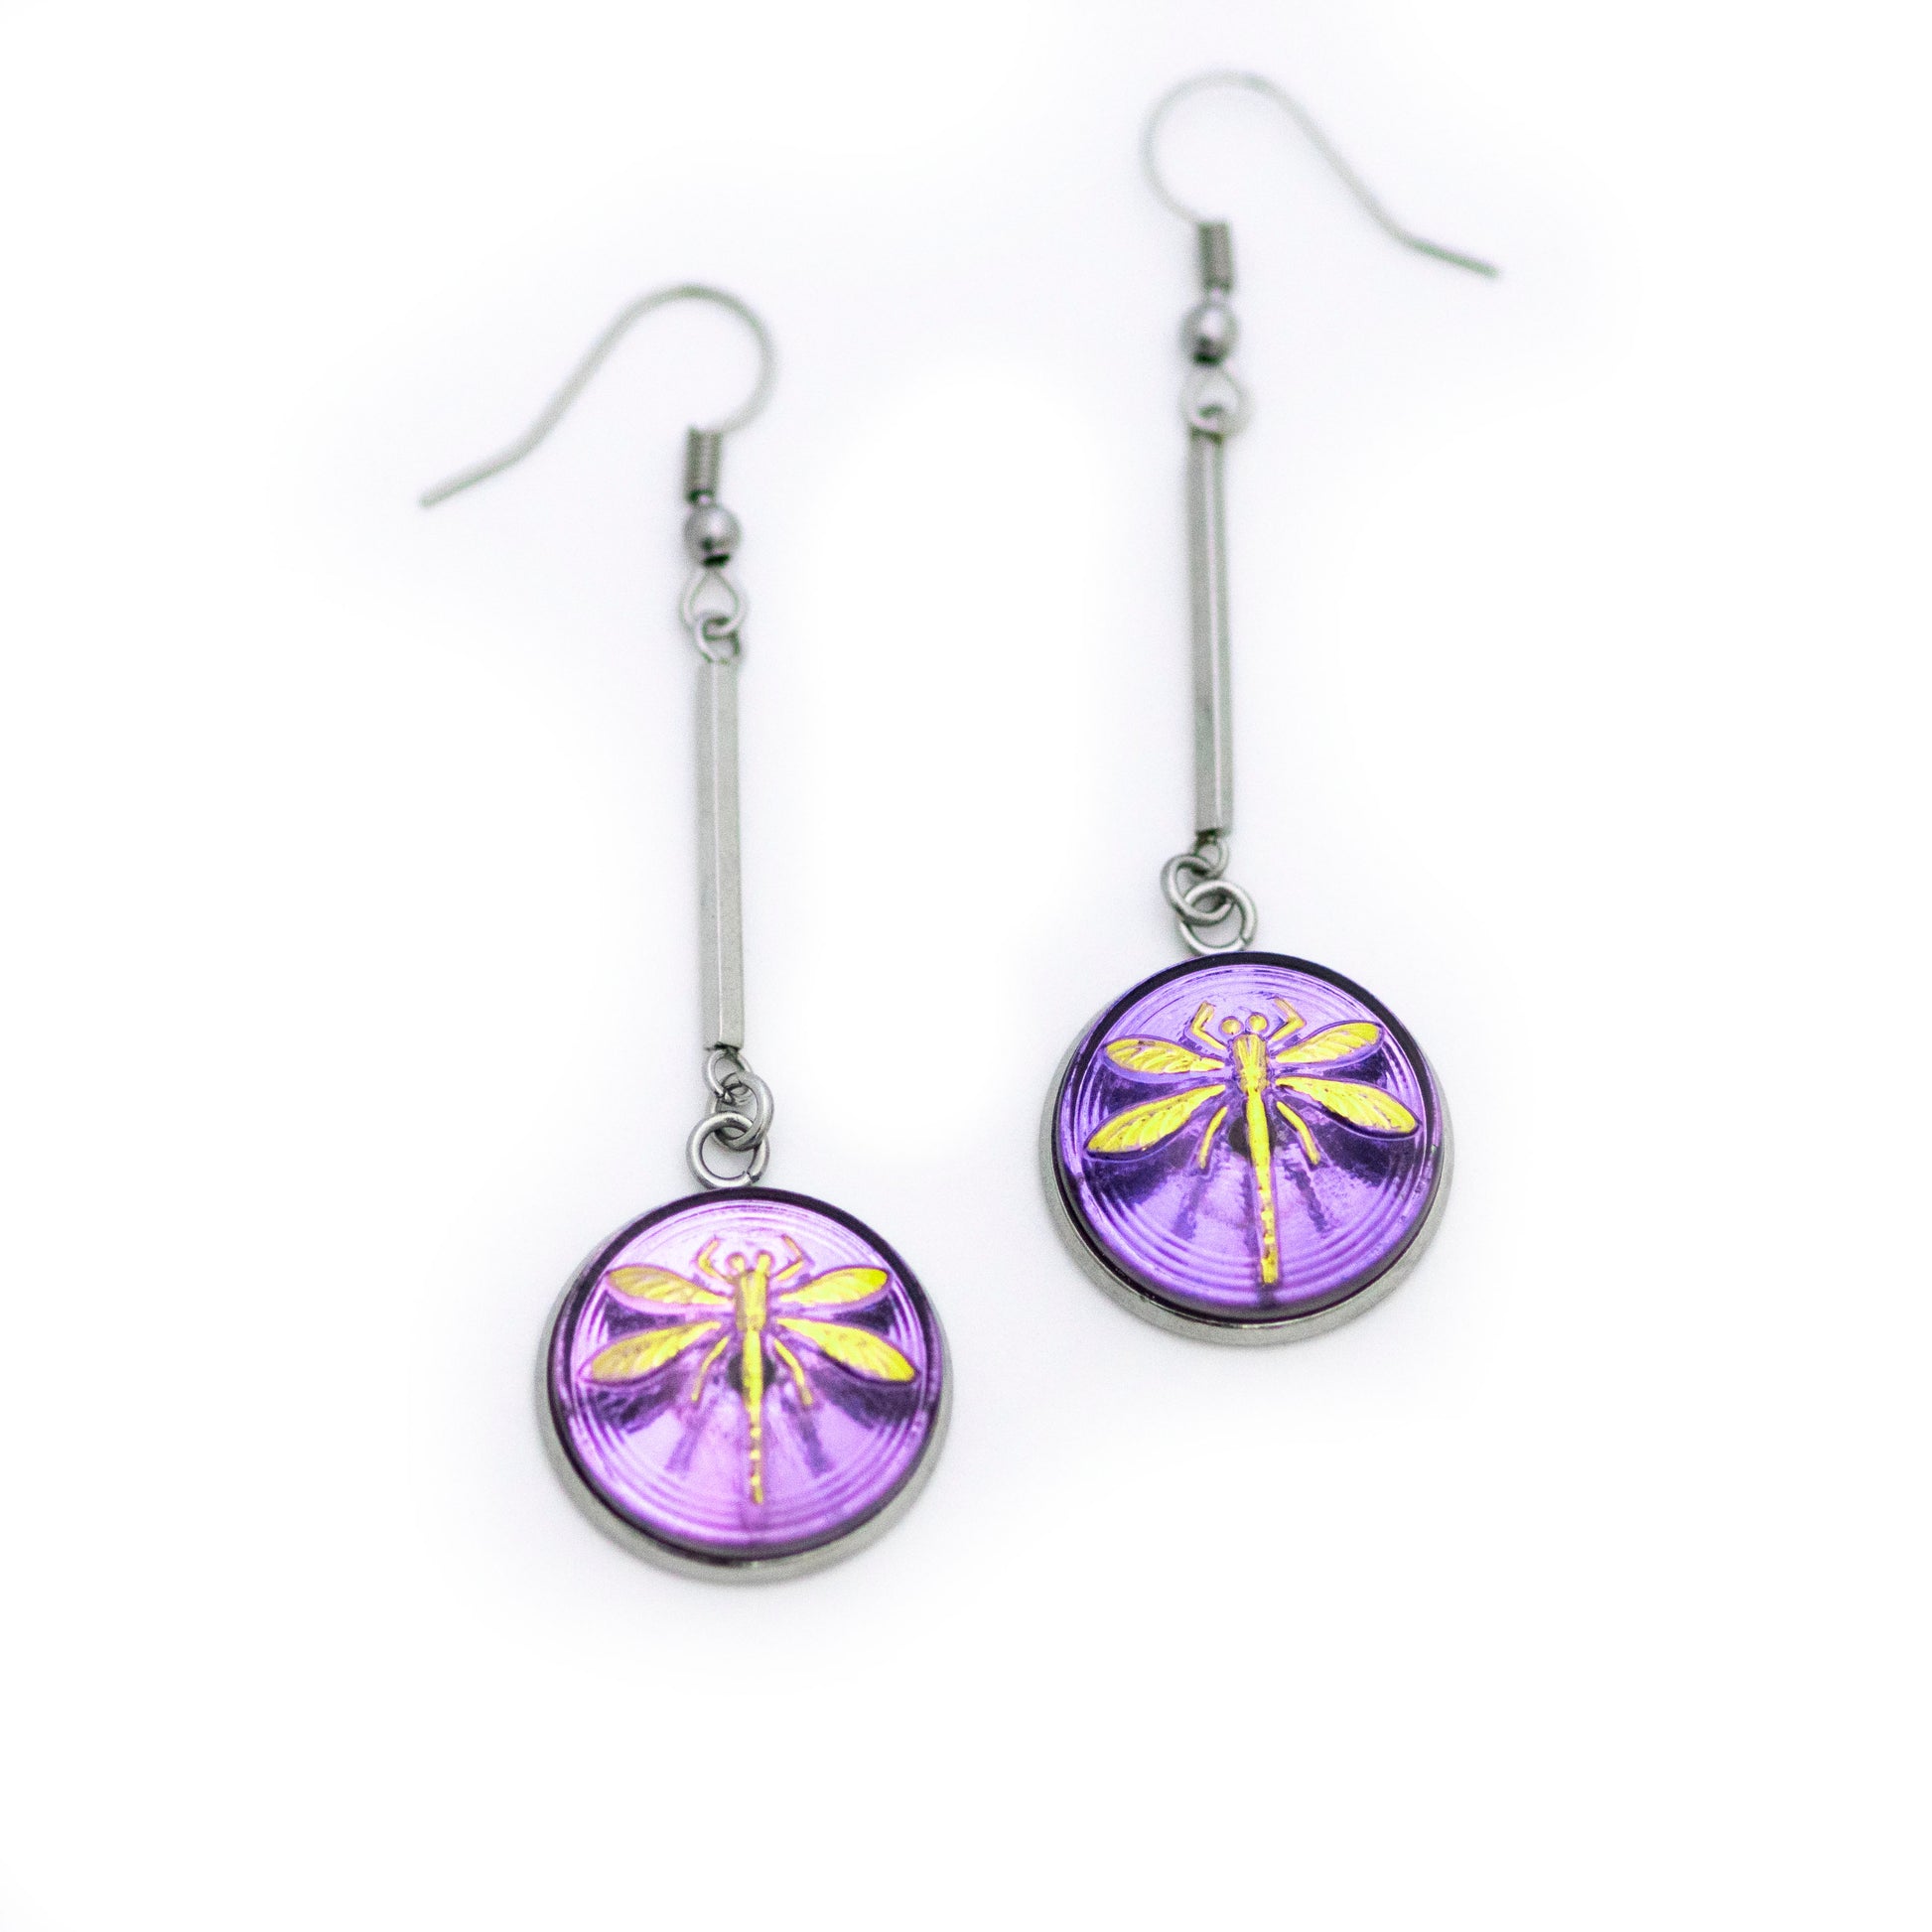 Purple and gold dragonfly buttons Czech glass button drop dangle earrings.